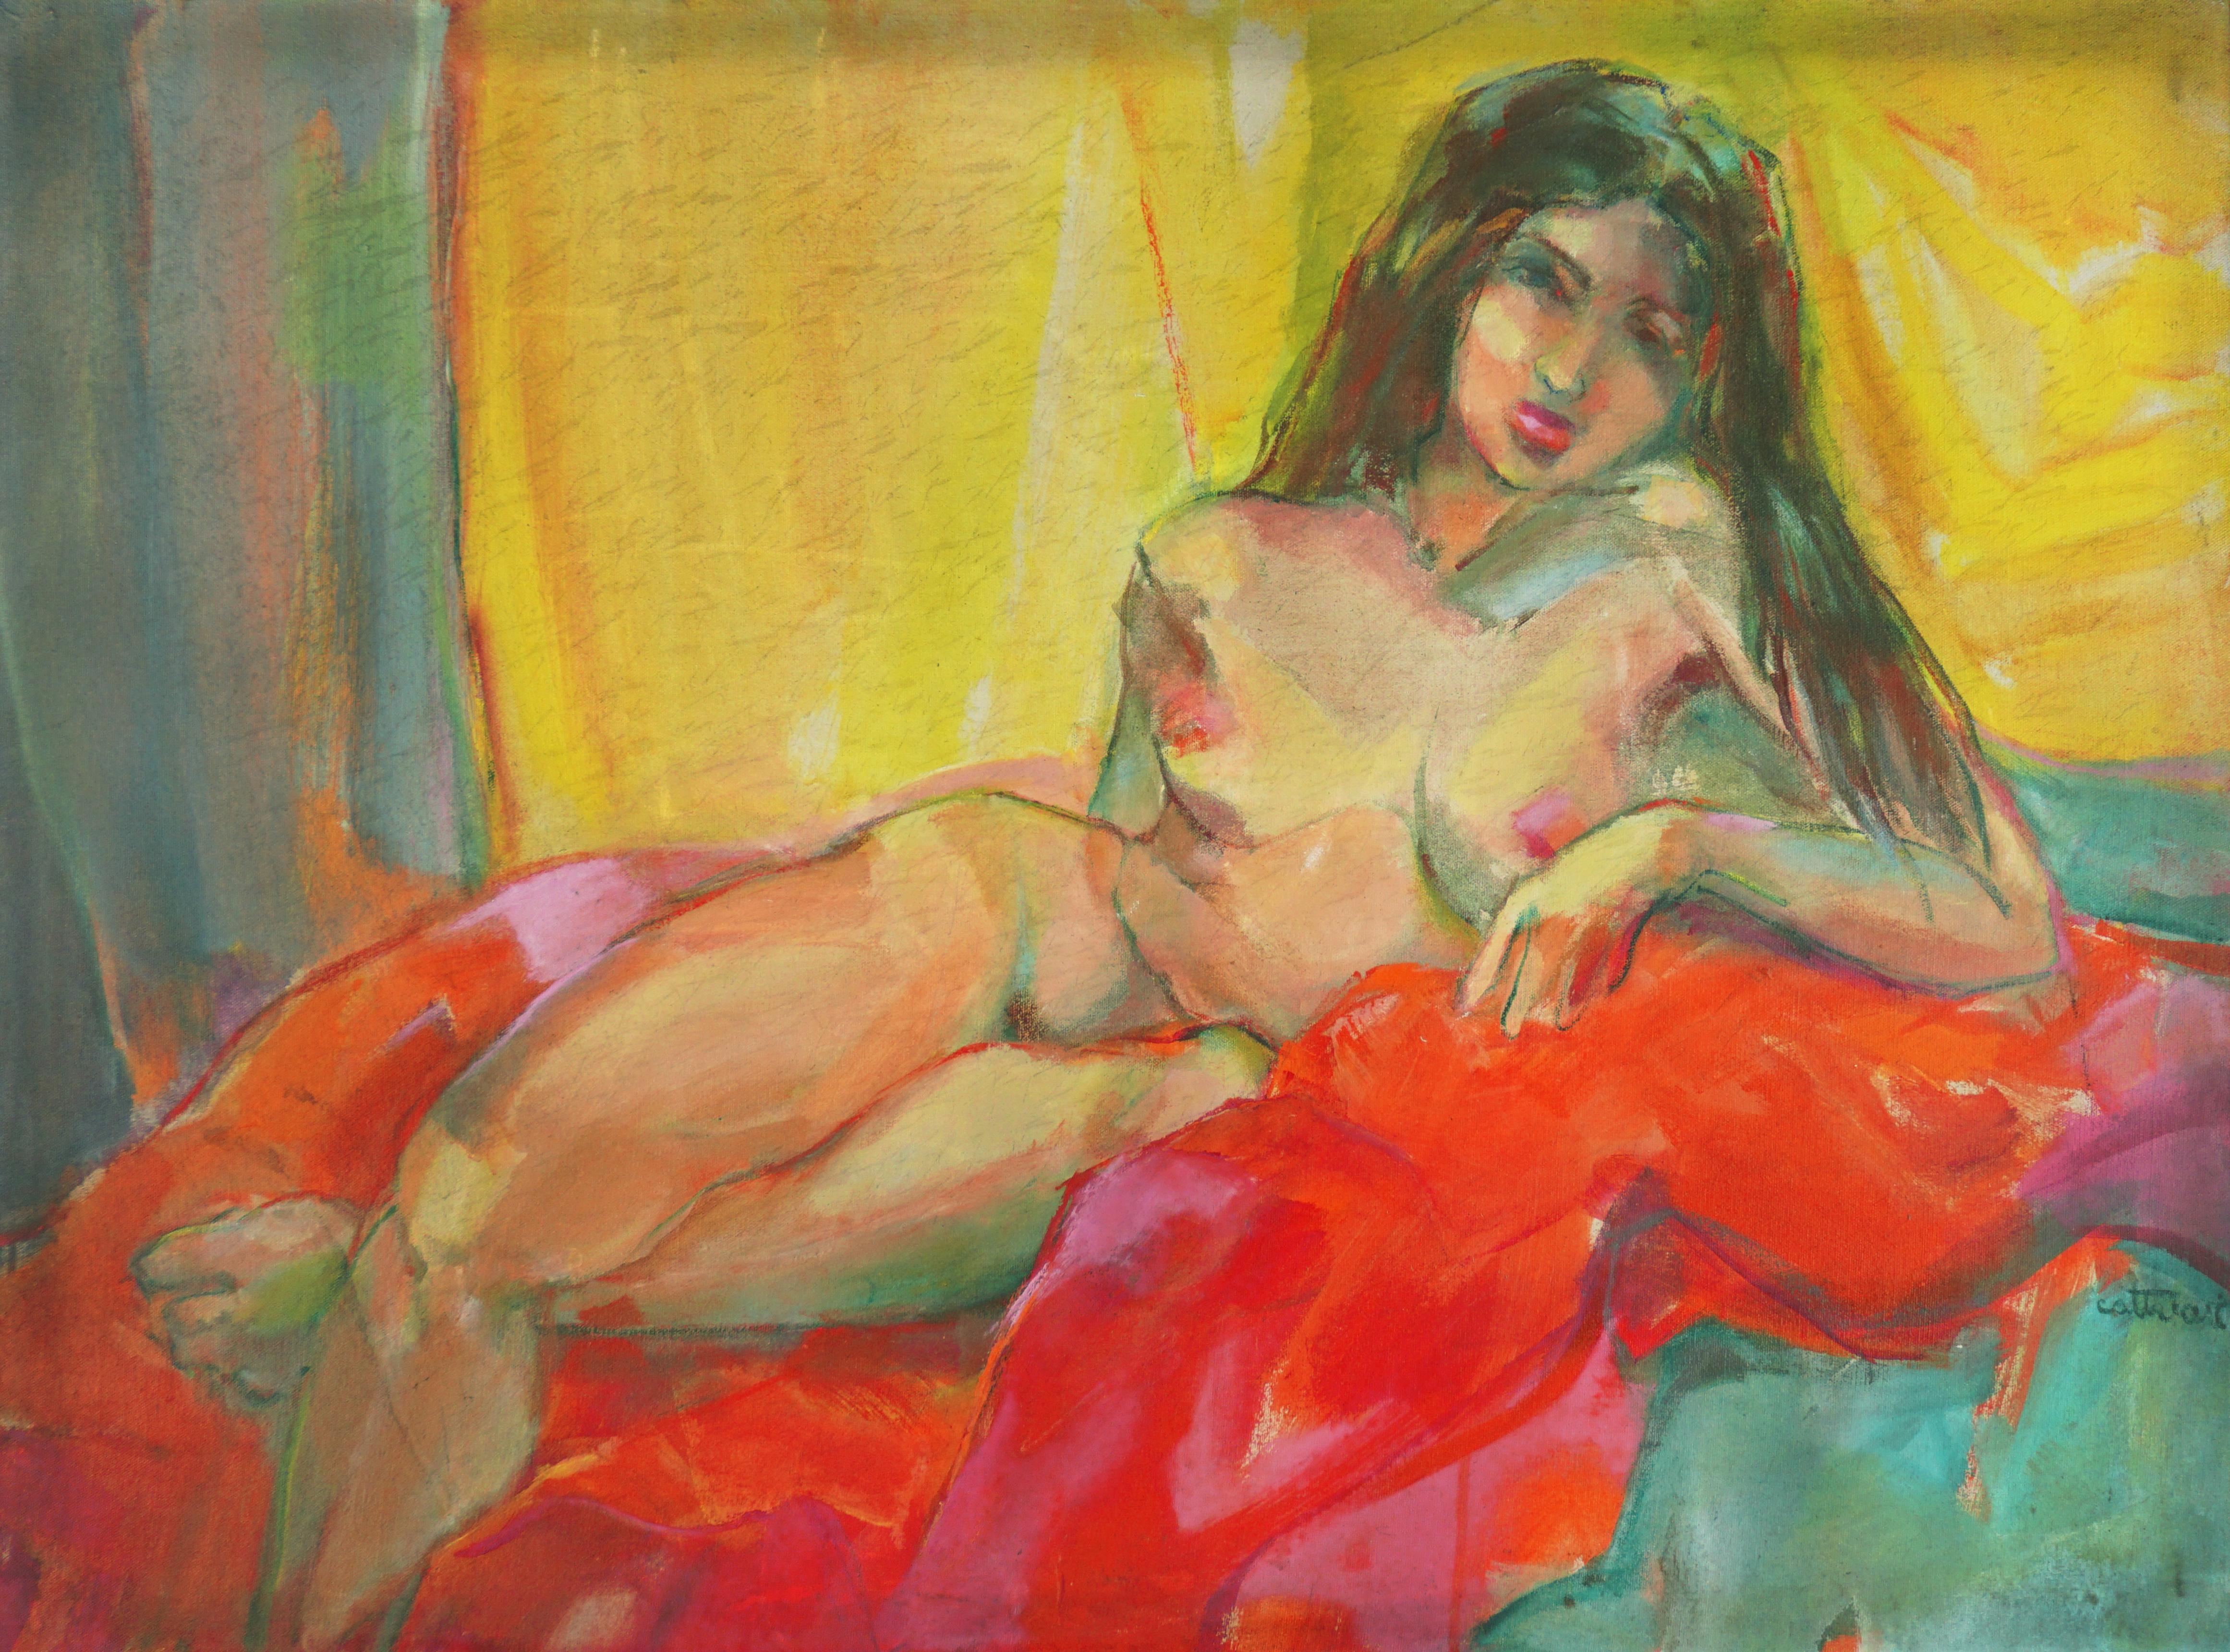 Reclining Woman, Mid Century Bay Area Nude Figurative with Red Drape - Painting by Marjorie Cathcart